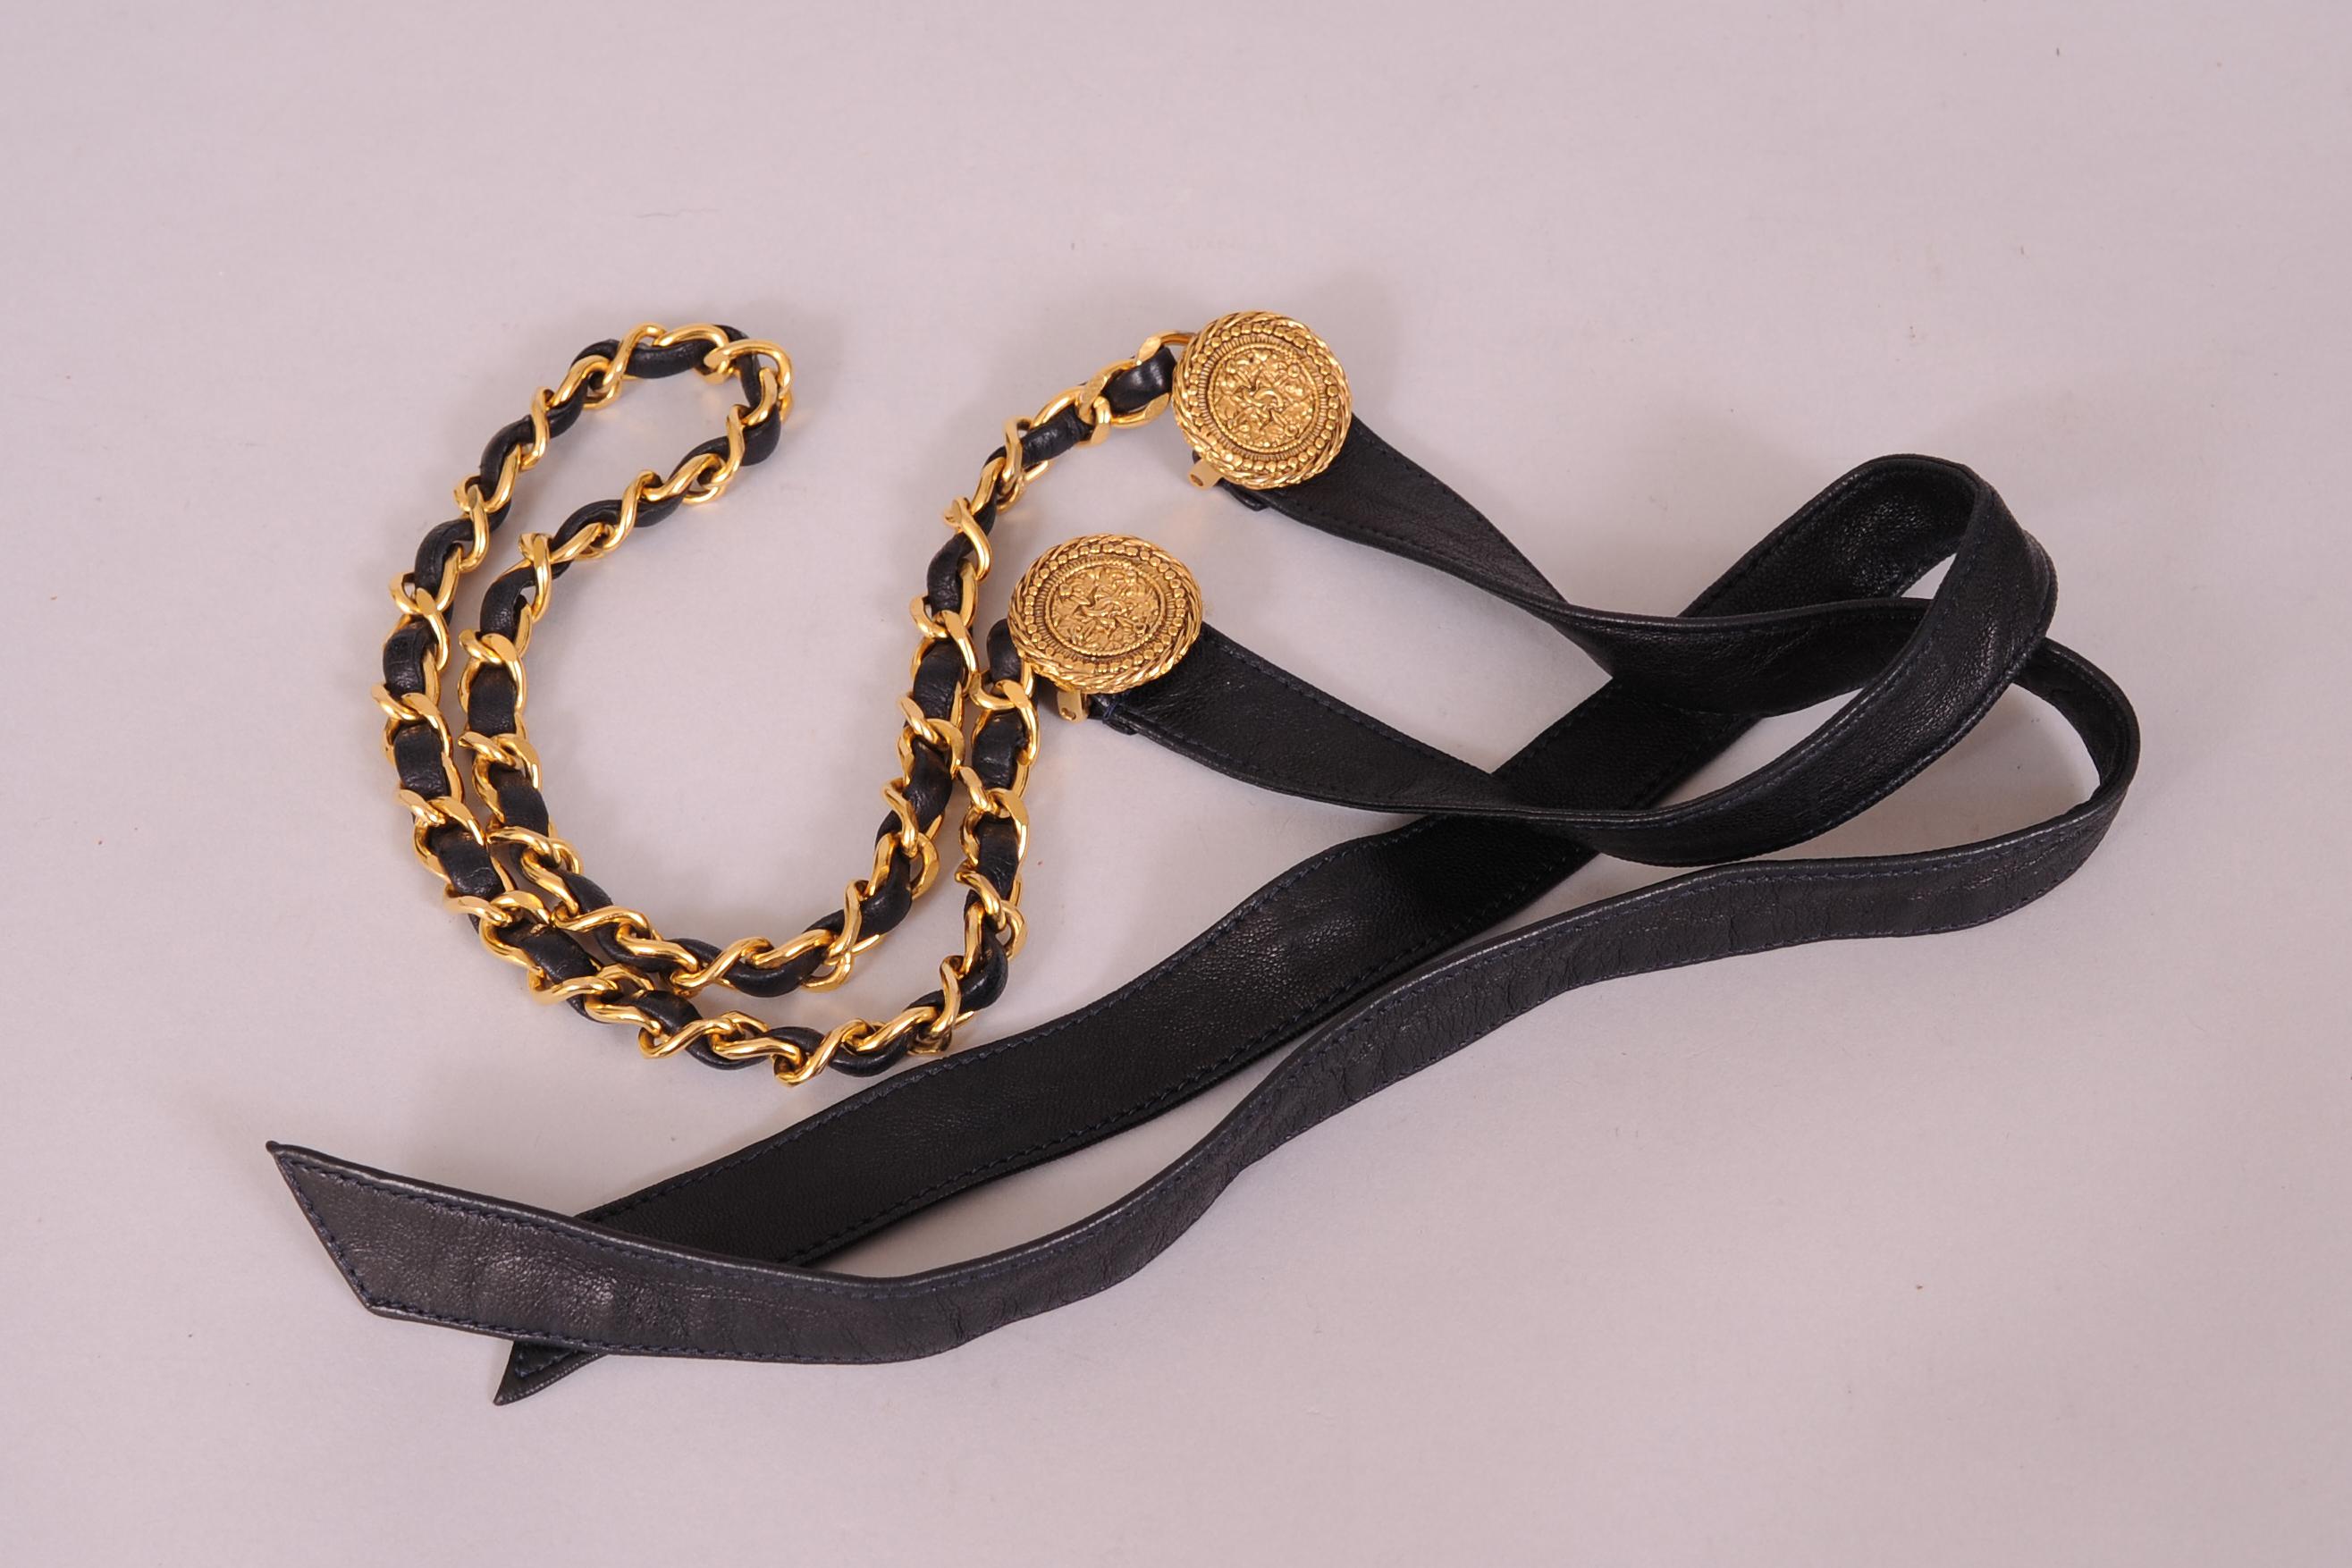 This vintage Chanel belt combines black lambskin leather ties, two logo stamped gold toned medallions, and a center section of the iconic Chanel chain threaded with black leather. It is in excellent vintage condition and is stamped CHANEL Made in